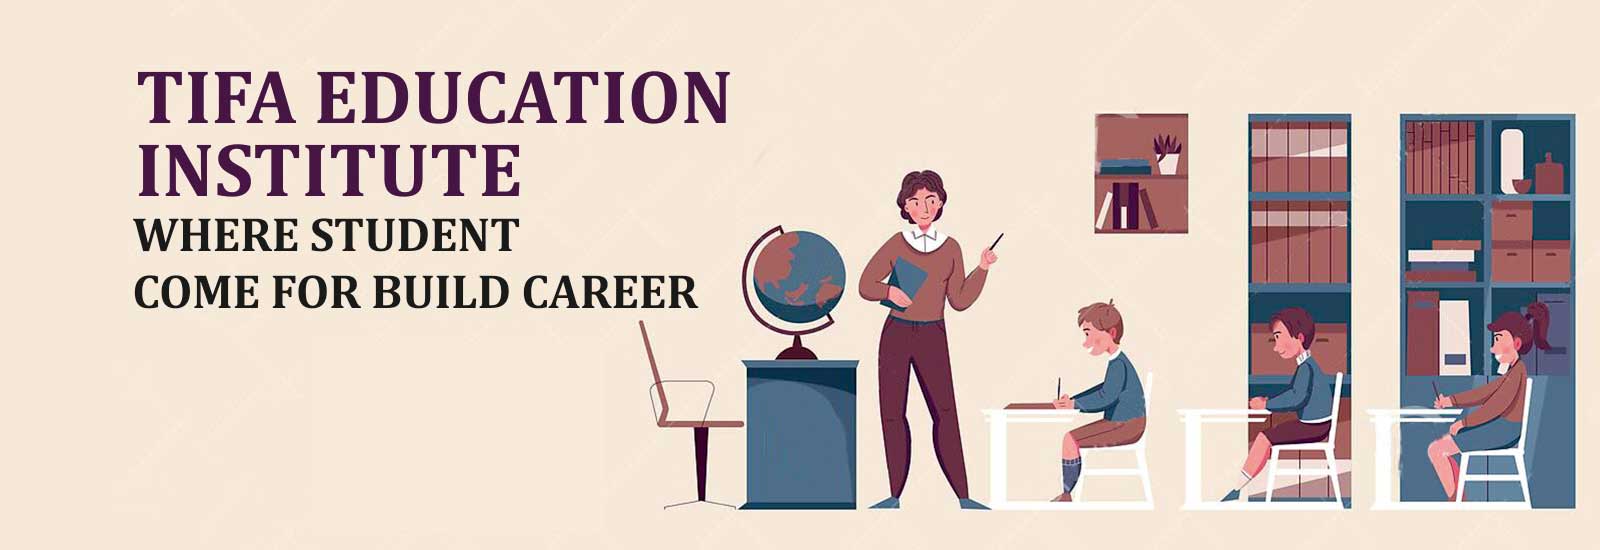 TIFA Education Institute- Where students  Come Build  A Career